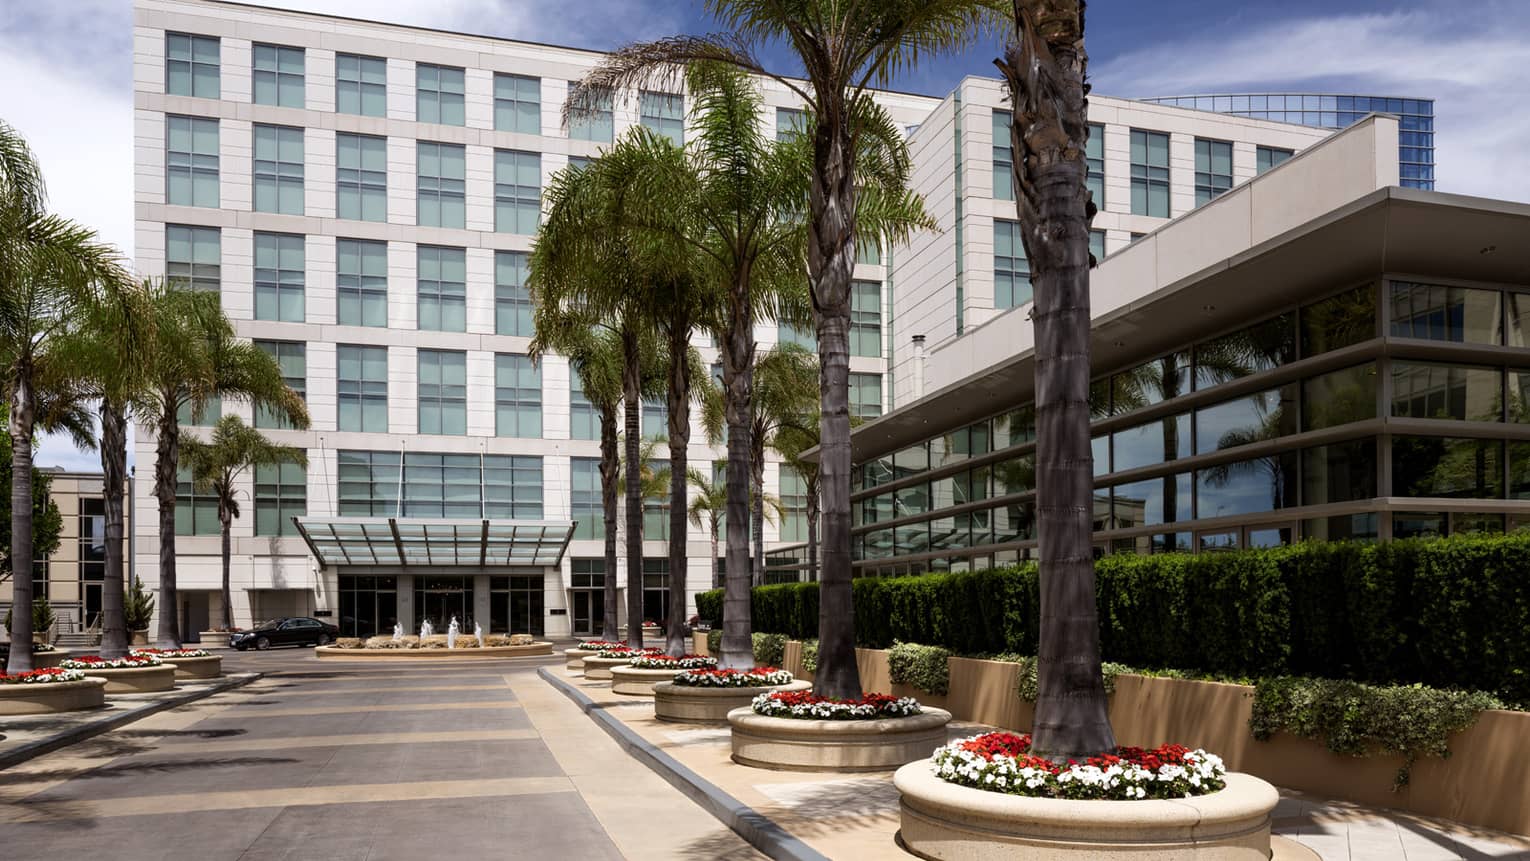 Four Seasons Hotel Silicon Valley at East Palo Alto exterior courtyard, potted palm trees 